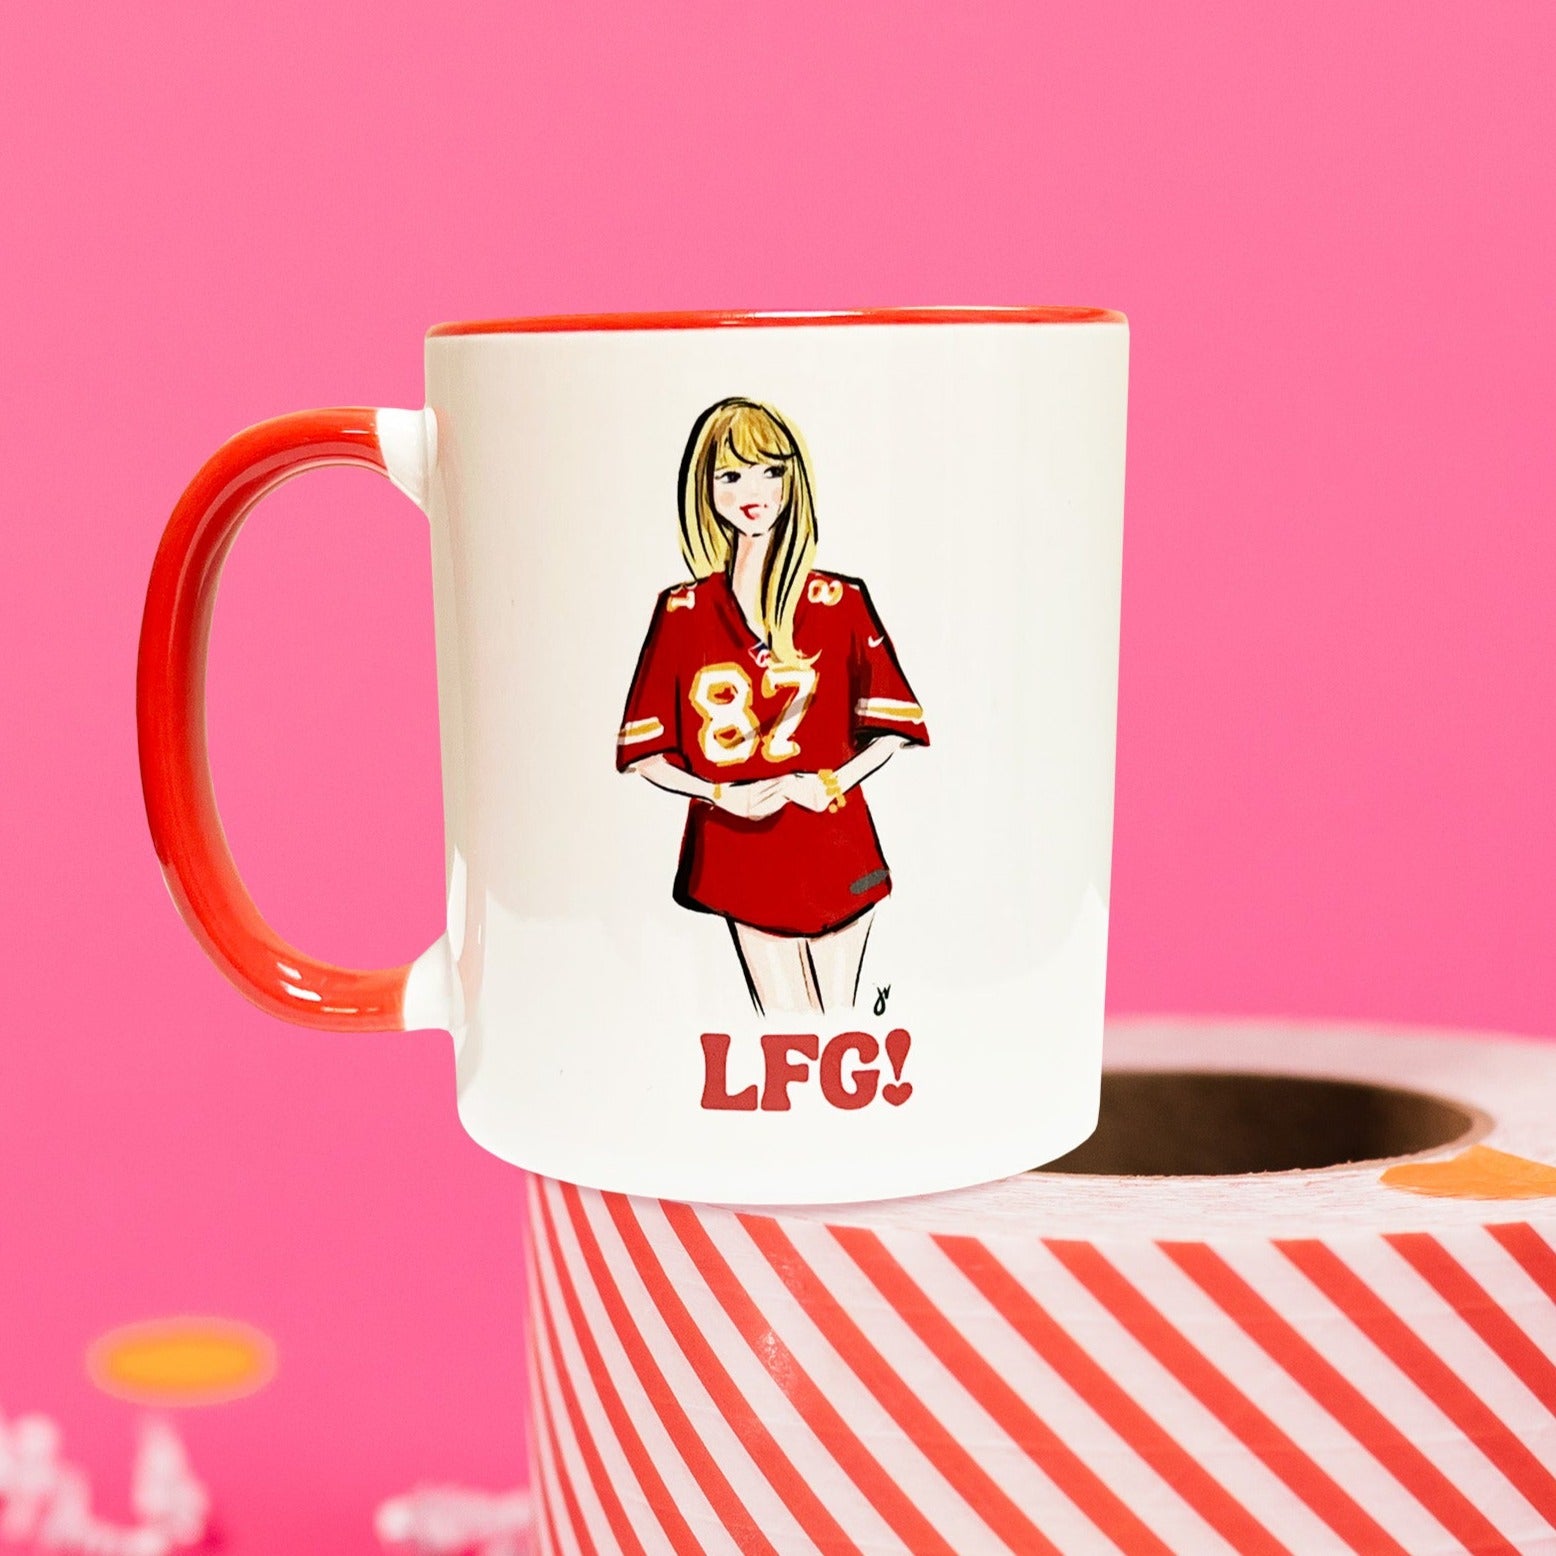 On a hot pink background sits a mug on top of a red and white striped packing tape with white crinkle and big, colorful confetti scattered around. There are mini disco balls. This Taylor Swift inspired mug has an illustration of Taylor Swift wearing a Kansa City Chiefs jersey with the number 87 on it. It has a red handle and rim.